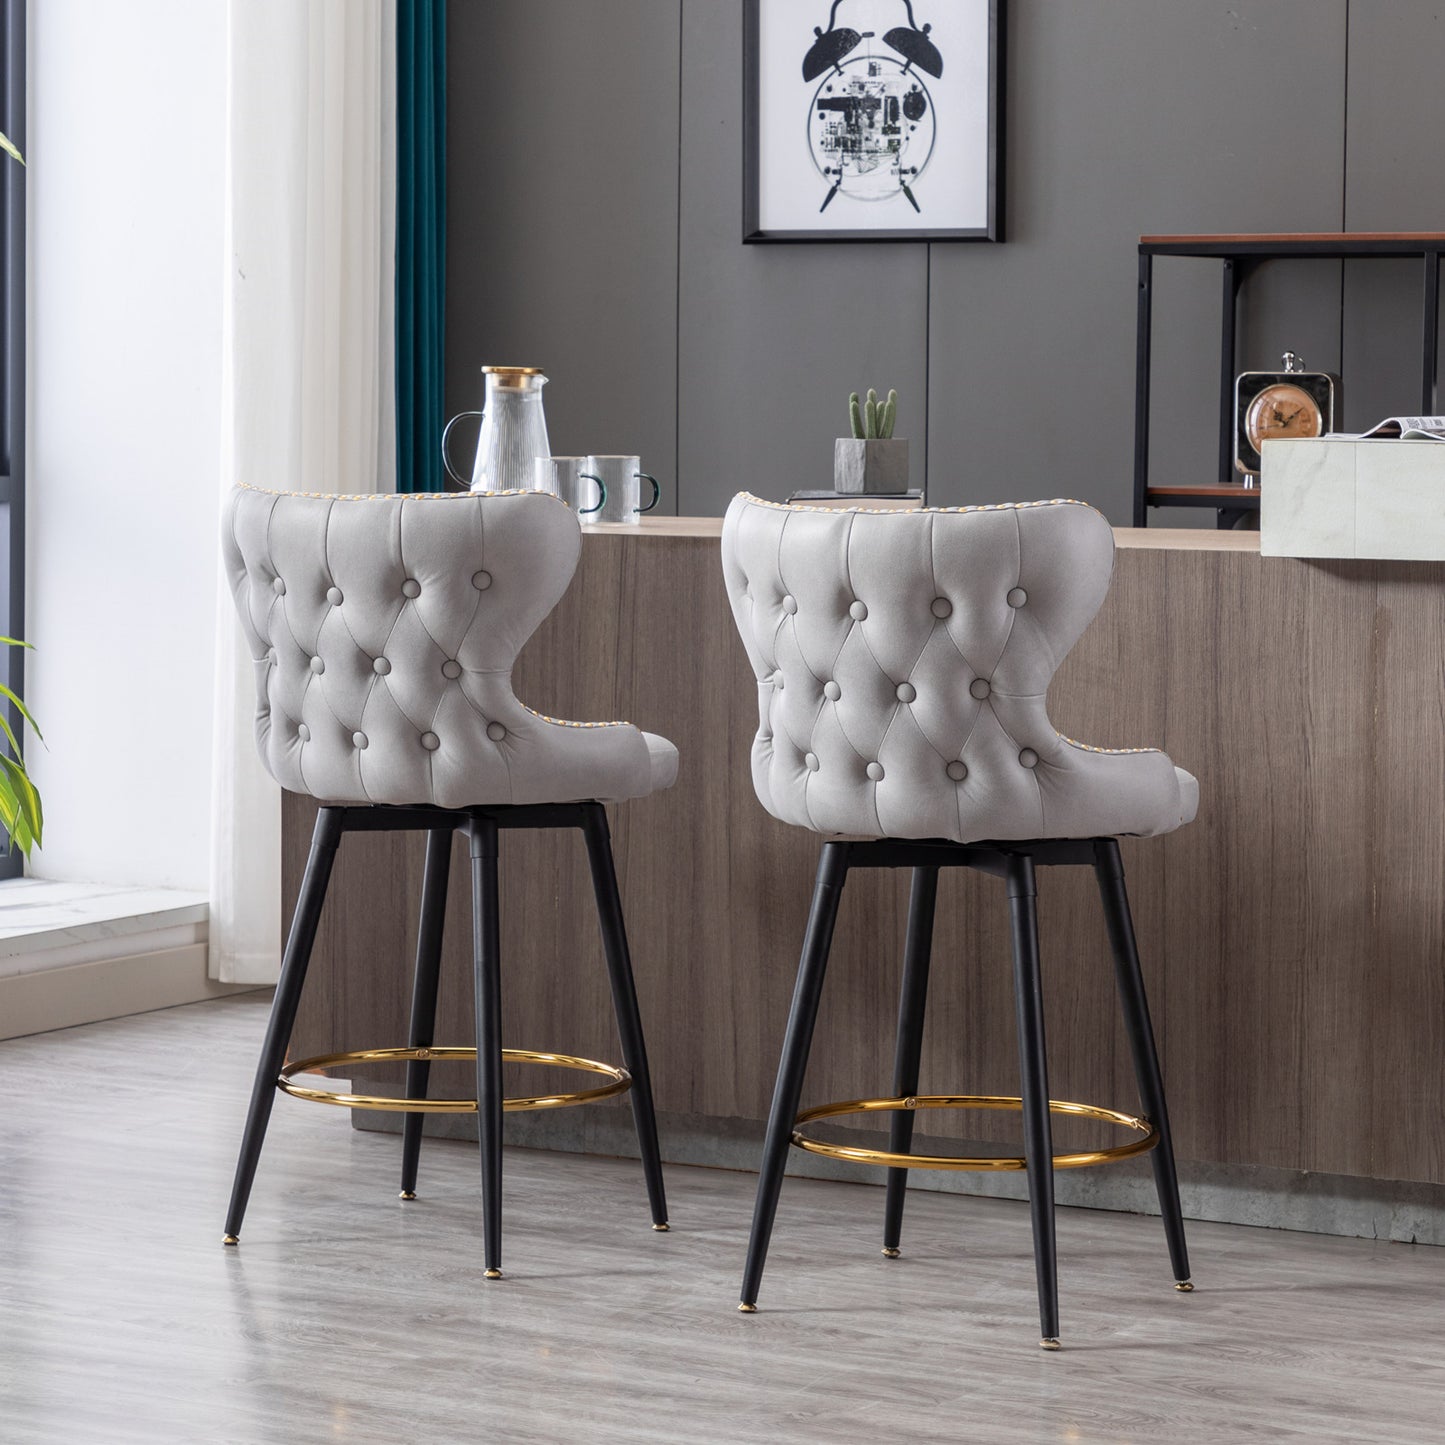 Counter Height 25" Modern Leathaire Fabric bar chairs, 180 degree Swivel Bar Stool Chair for Kitchen, Tufted Gold Nailhead Trim Bar Stools with Metal Legs, Set of 2 (Light Gray)